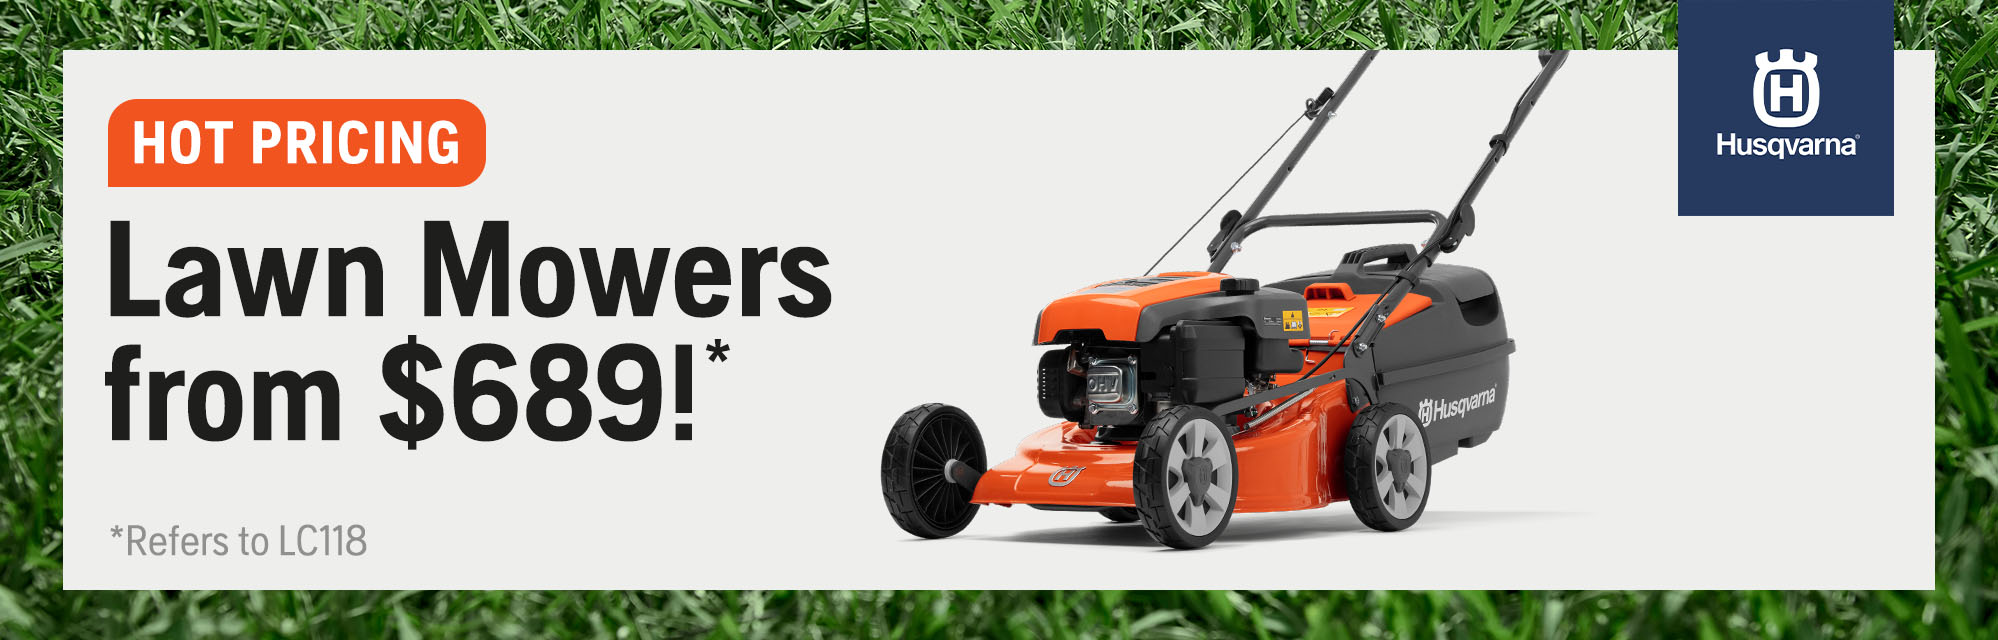 Lawn Mowers from $689